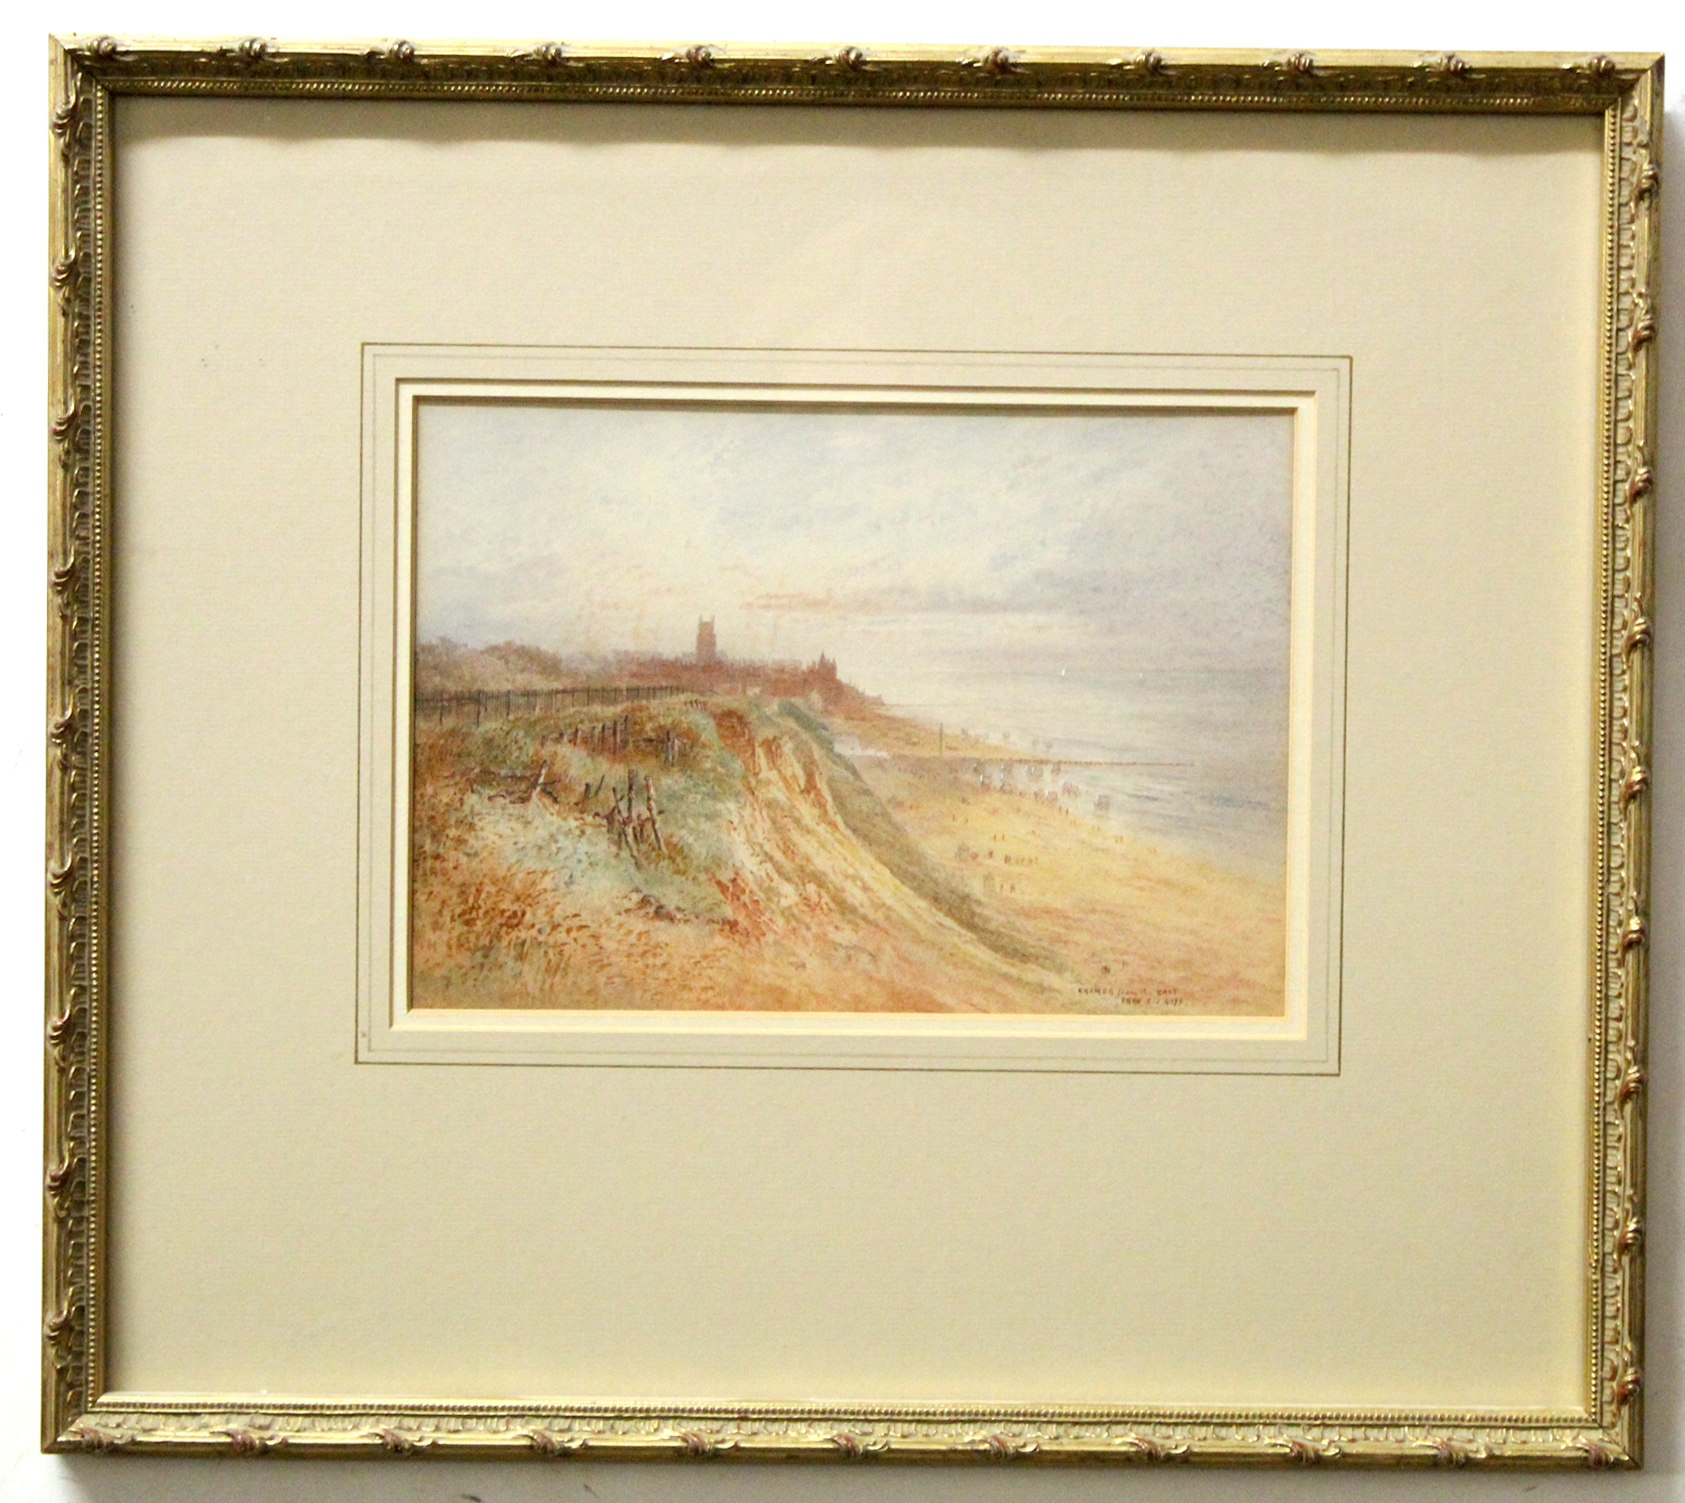 Frederick E J Goff, signed watercolour, inscribed "Cromer from the East", 17 x 24cm